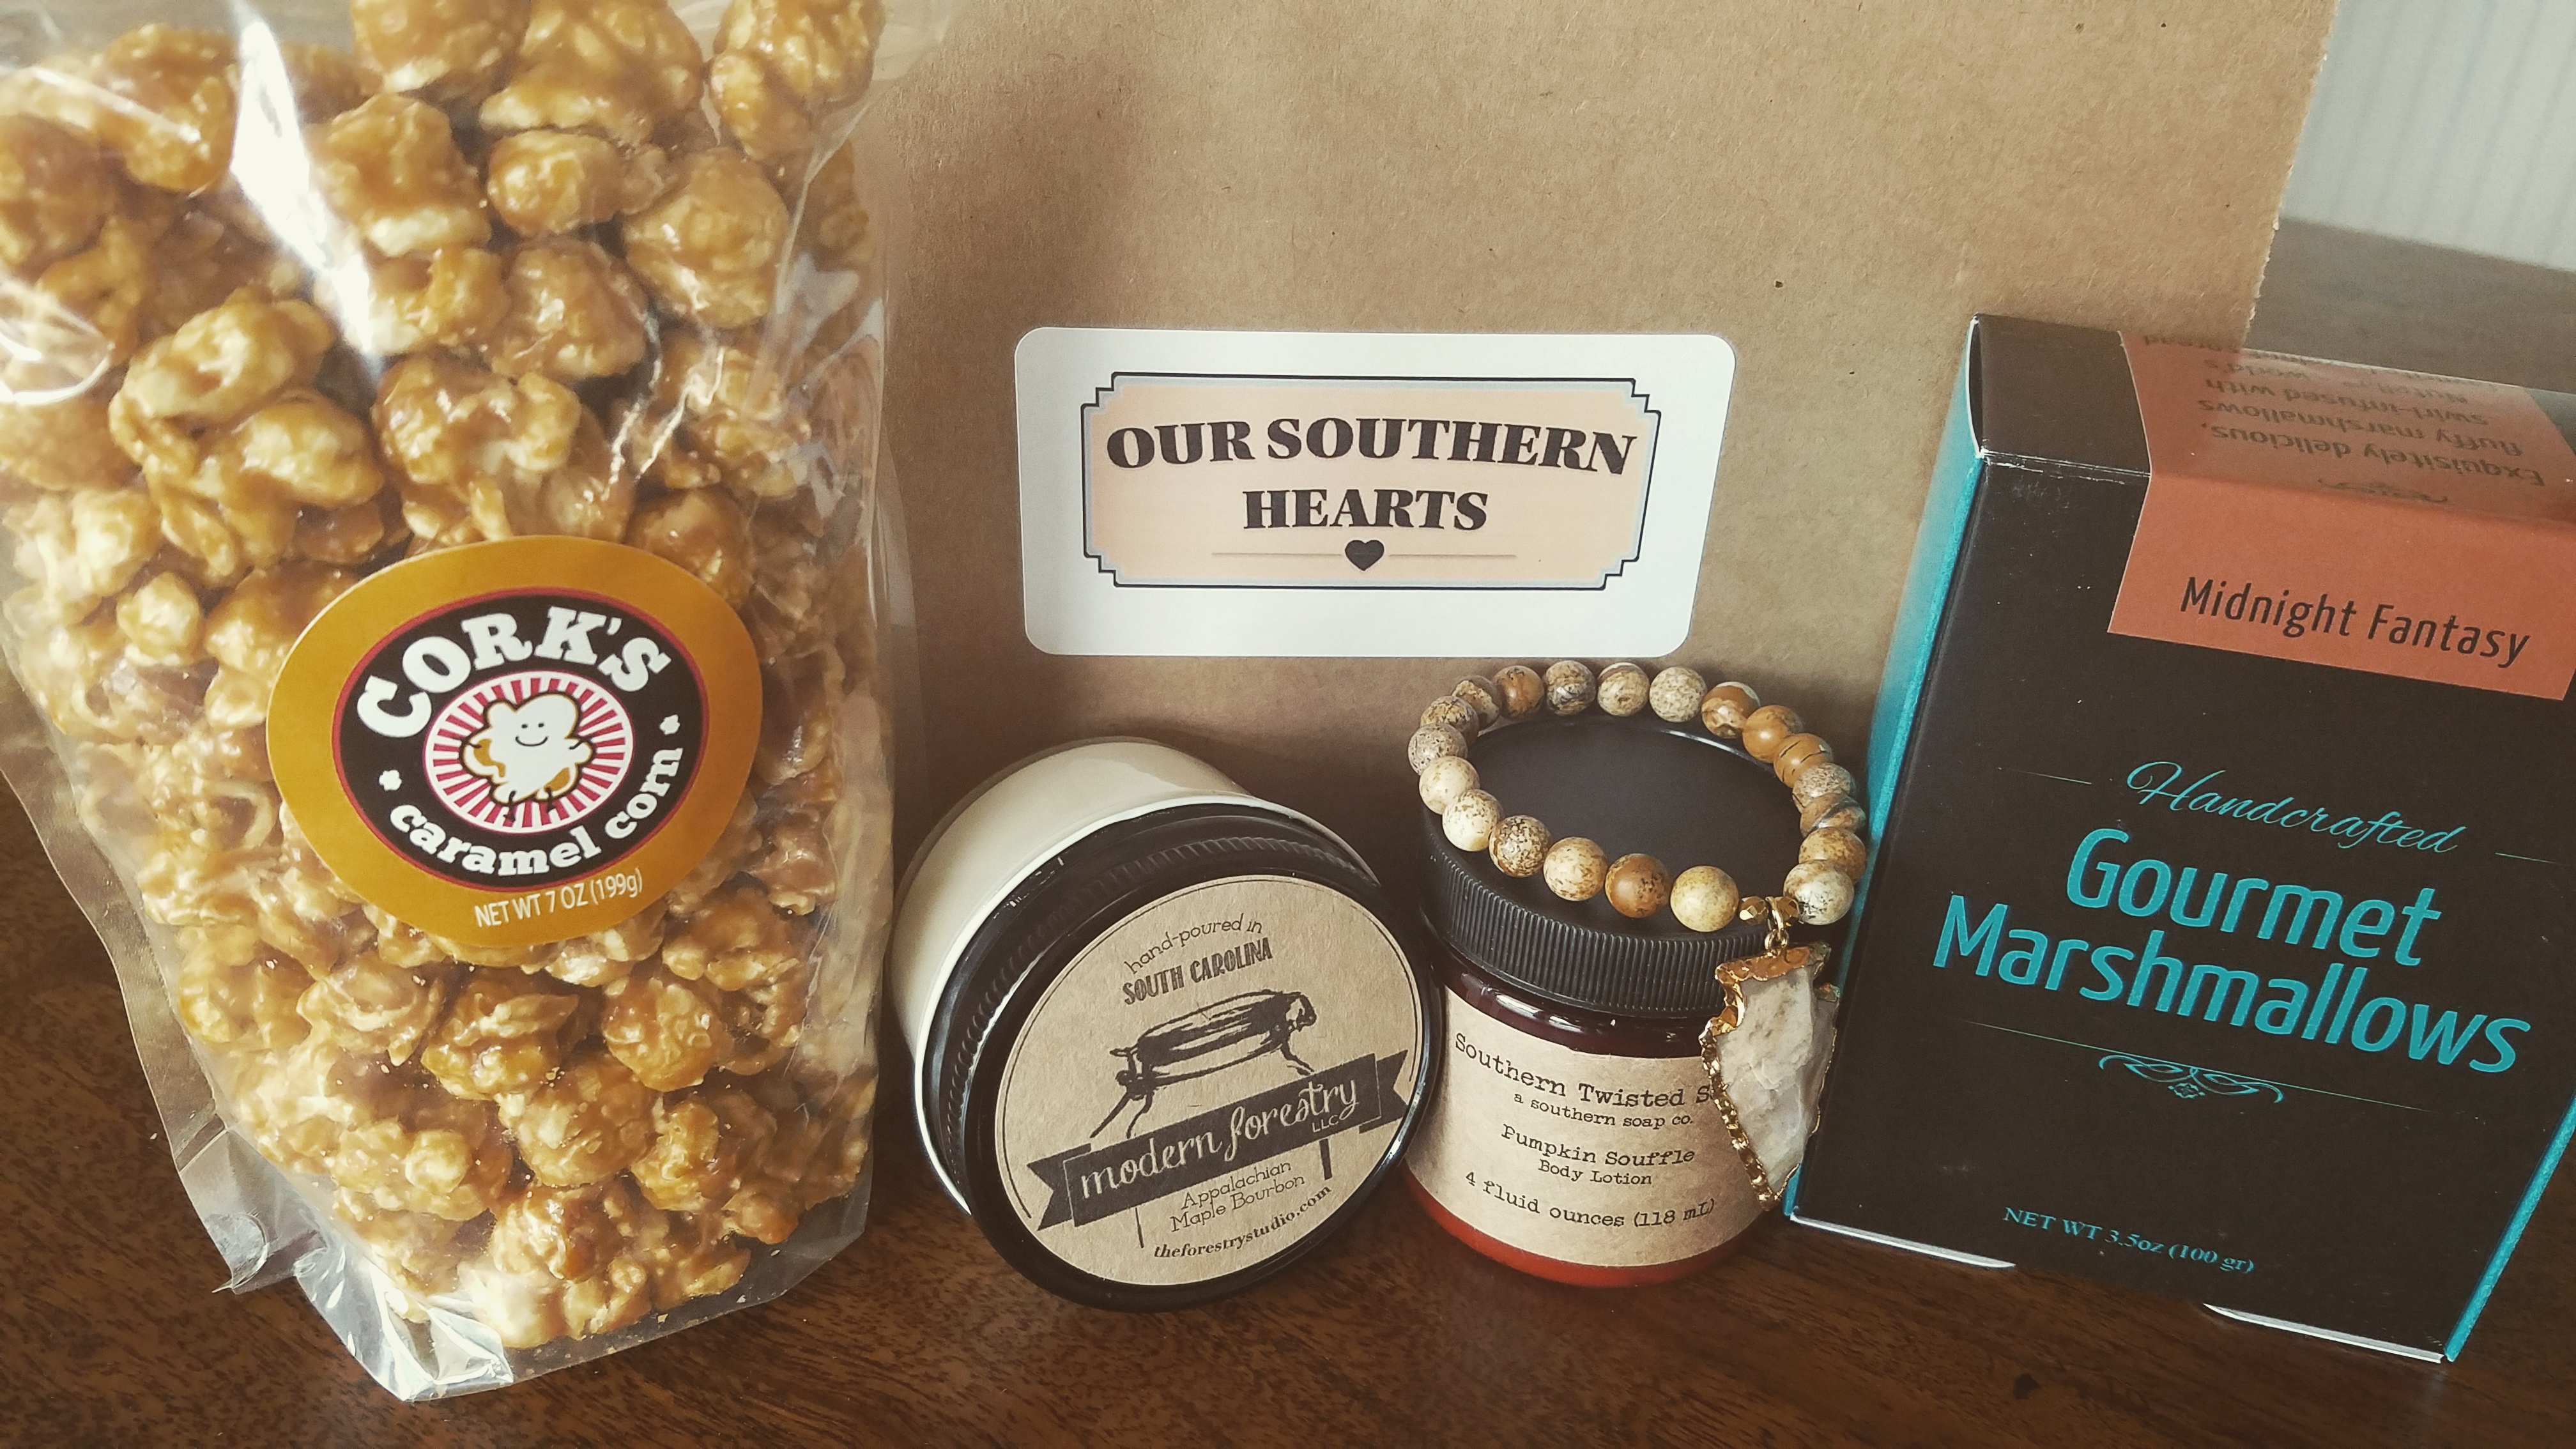 Our Southern Hearts Cyber Monday Deals – $7 Off December Box Or Up To $50 Off Pre-Paid Subscriptions!